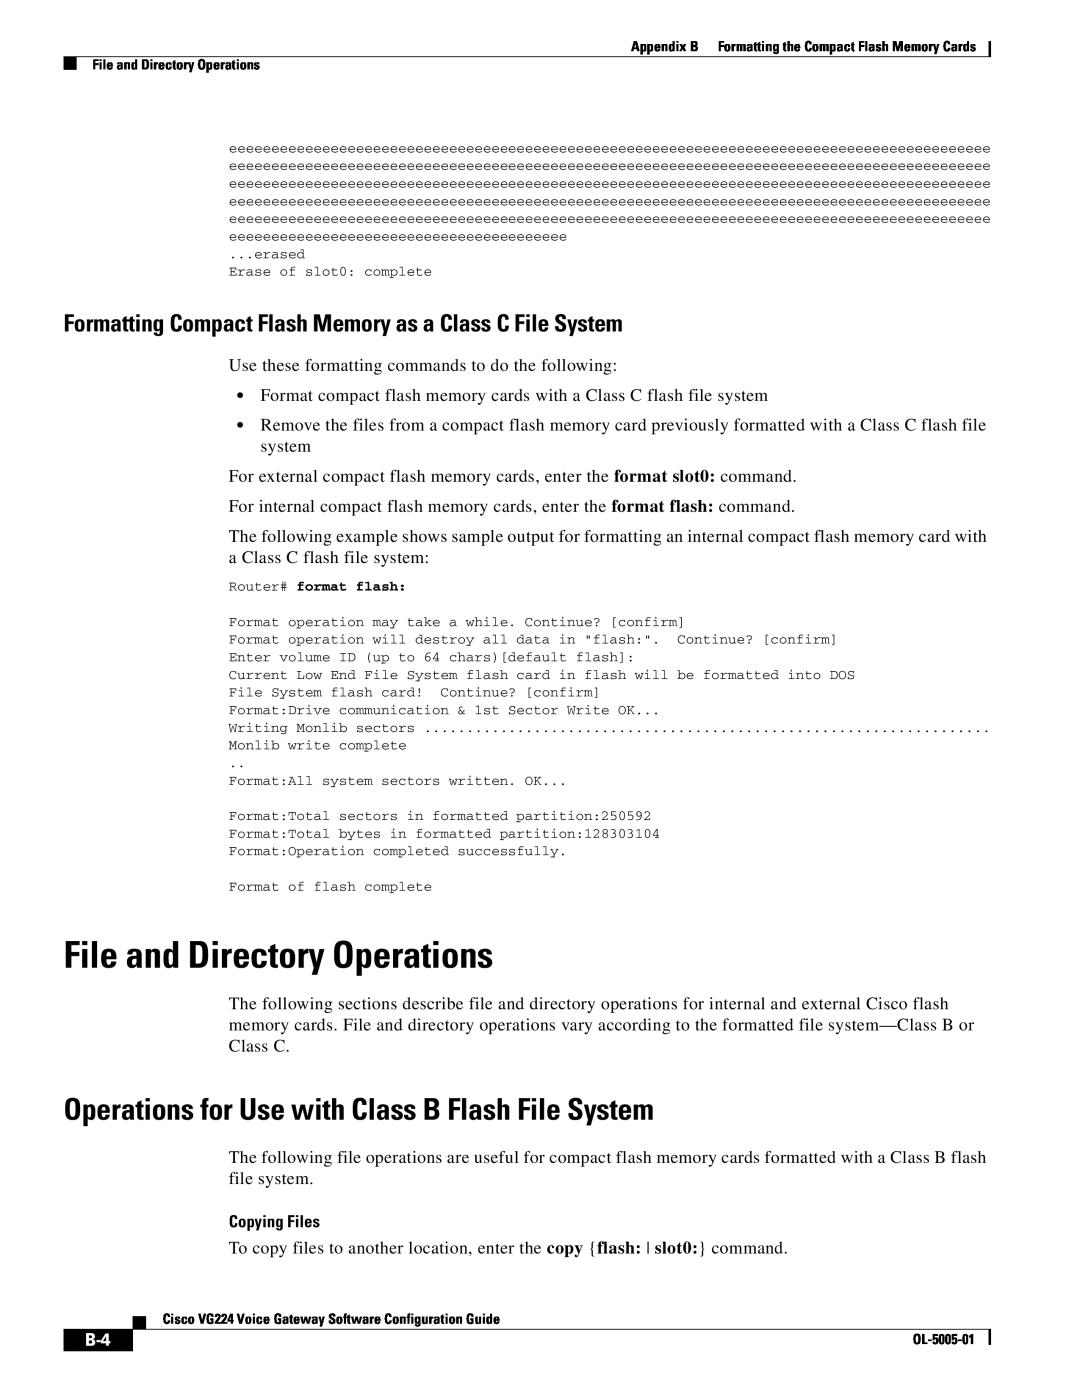 Cisco Systems VG224 manual File and Directory Operations, Operations for Use with Class B Flash File System, Copying Files 